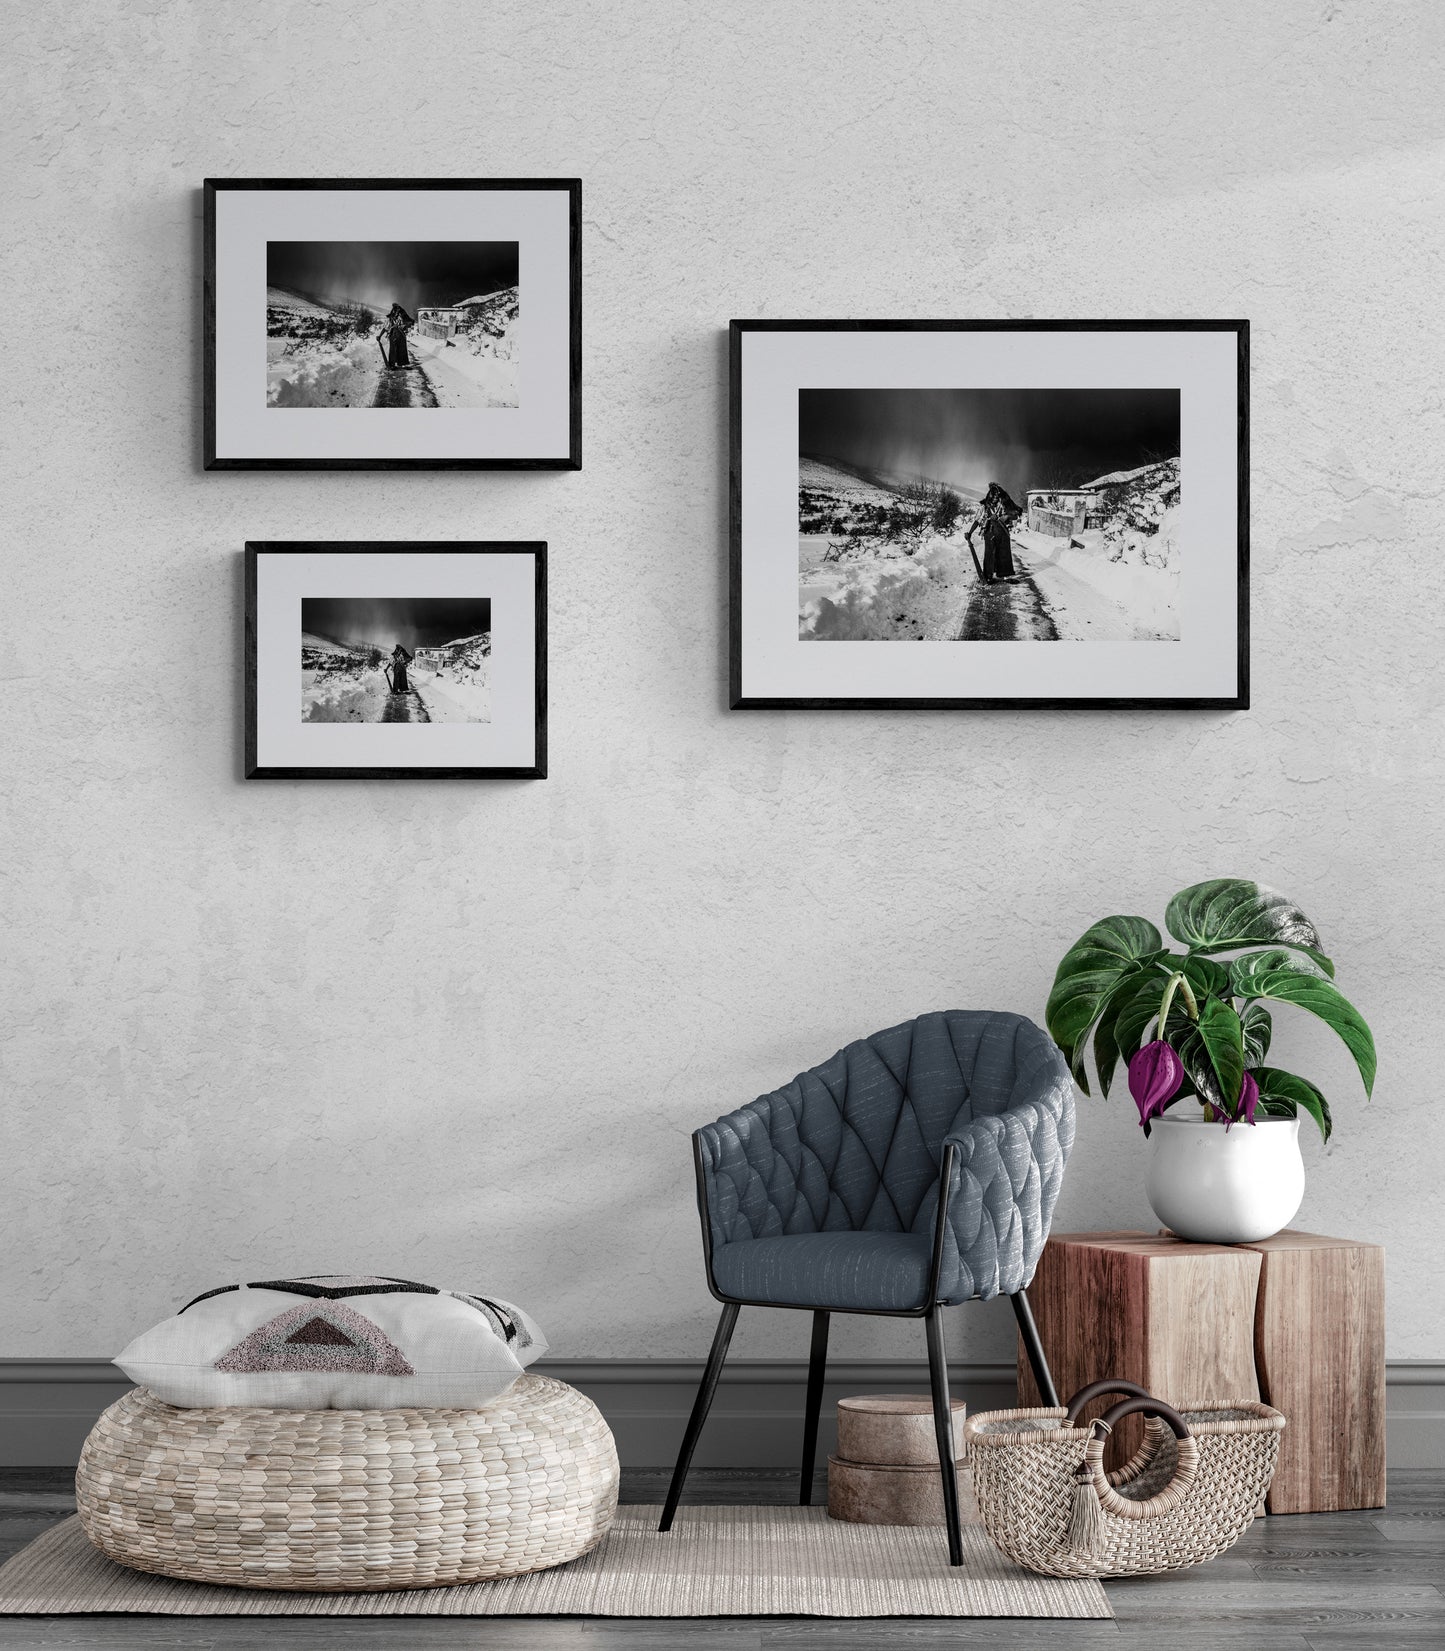 Black and White Photography Wall Art Greece | Arapides in Volax Drama by George Tatakis - framing options